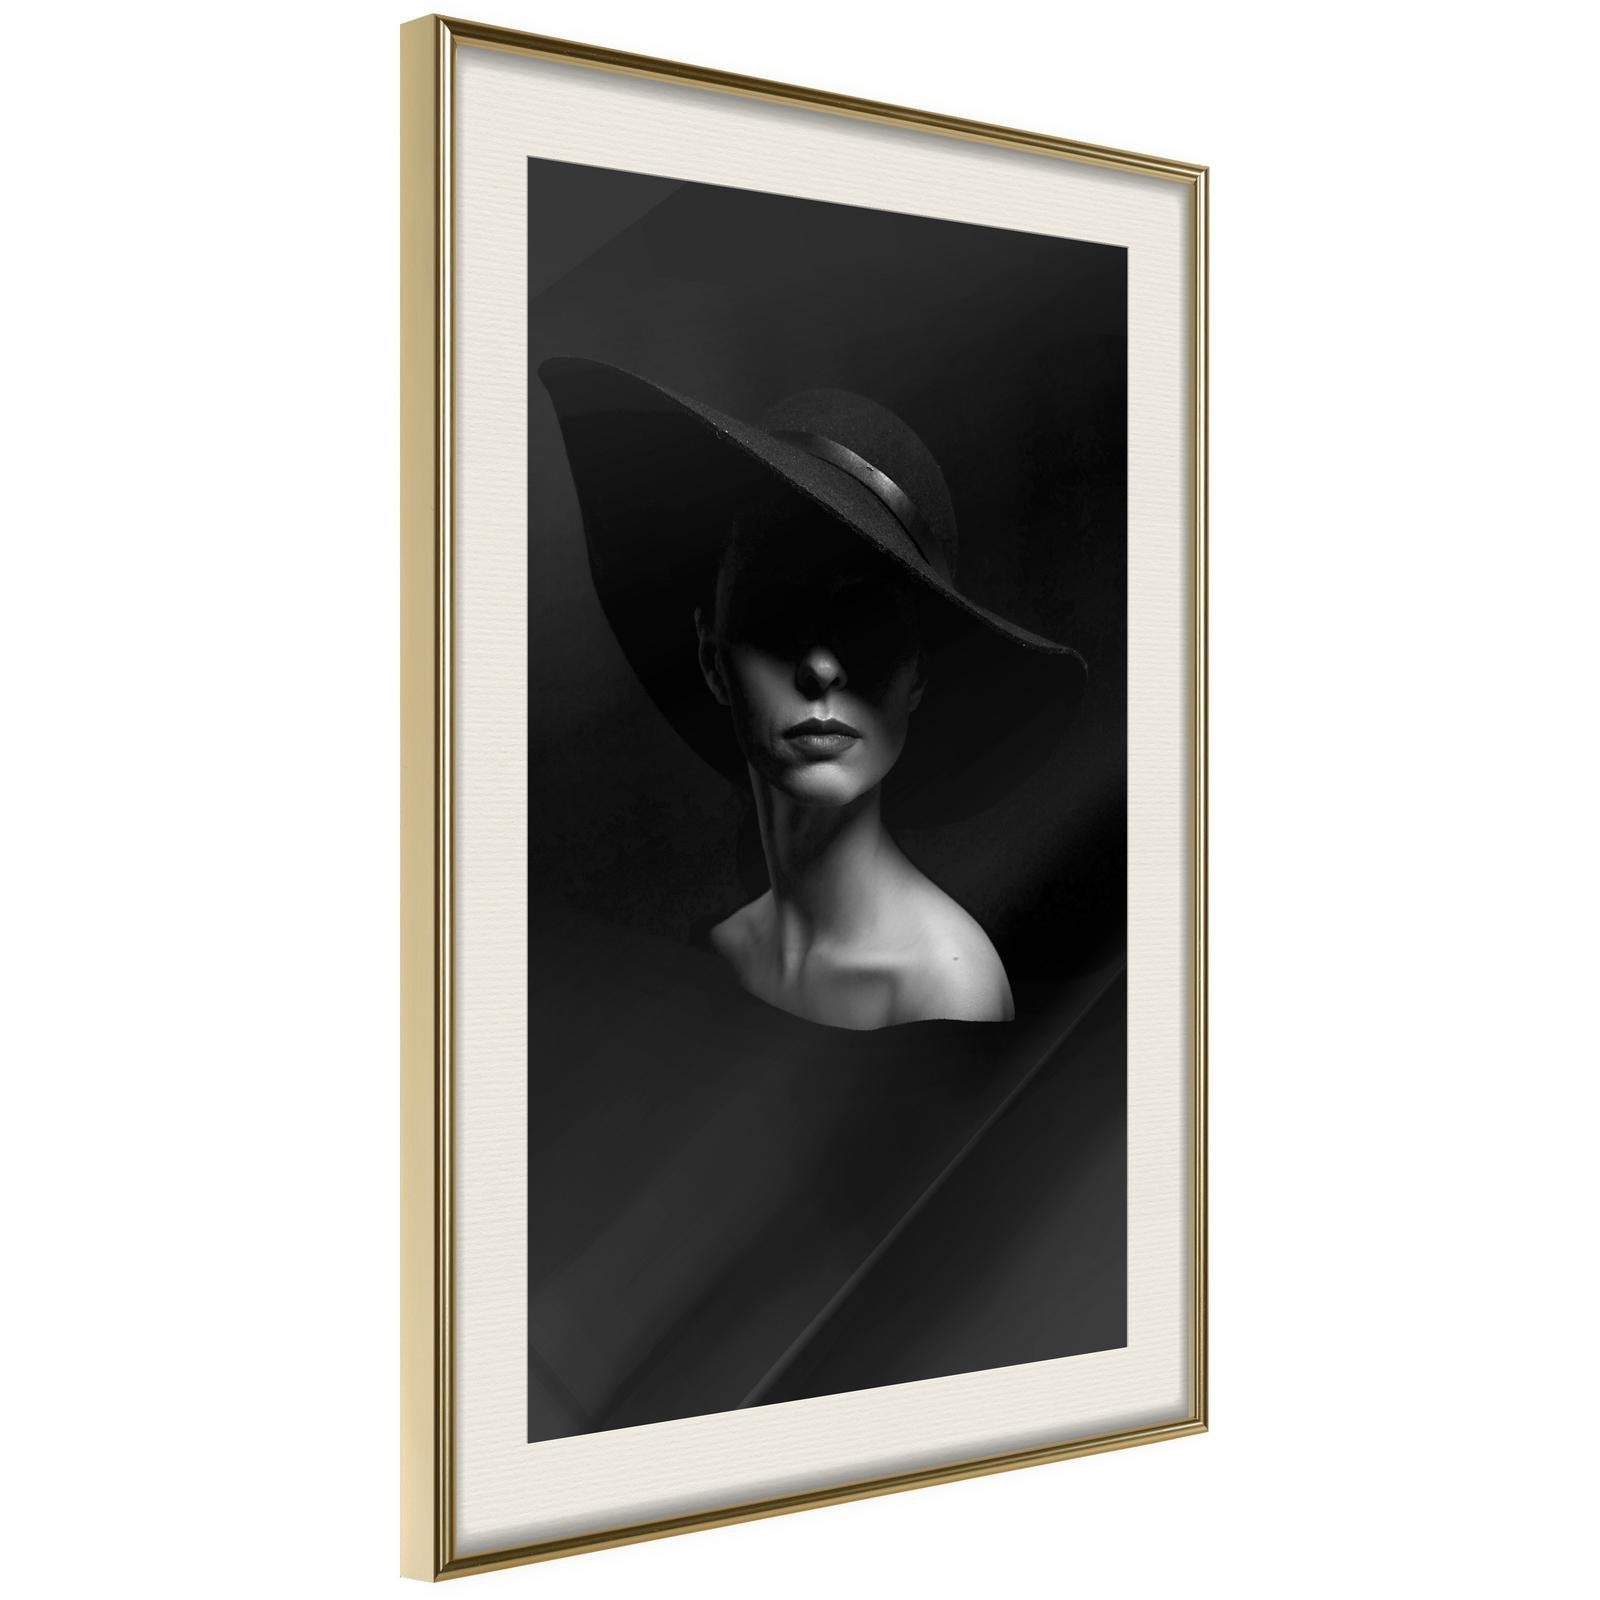 Inramad Poster / Tavla - Woman in a Hat-Poster Inramad-Artgeist-20x30-Guldram med passepartout-peaceofhome.se